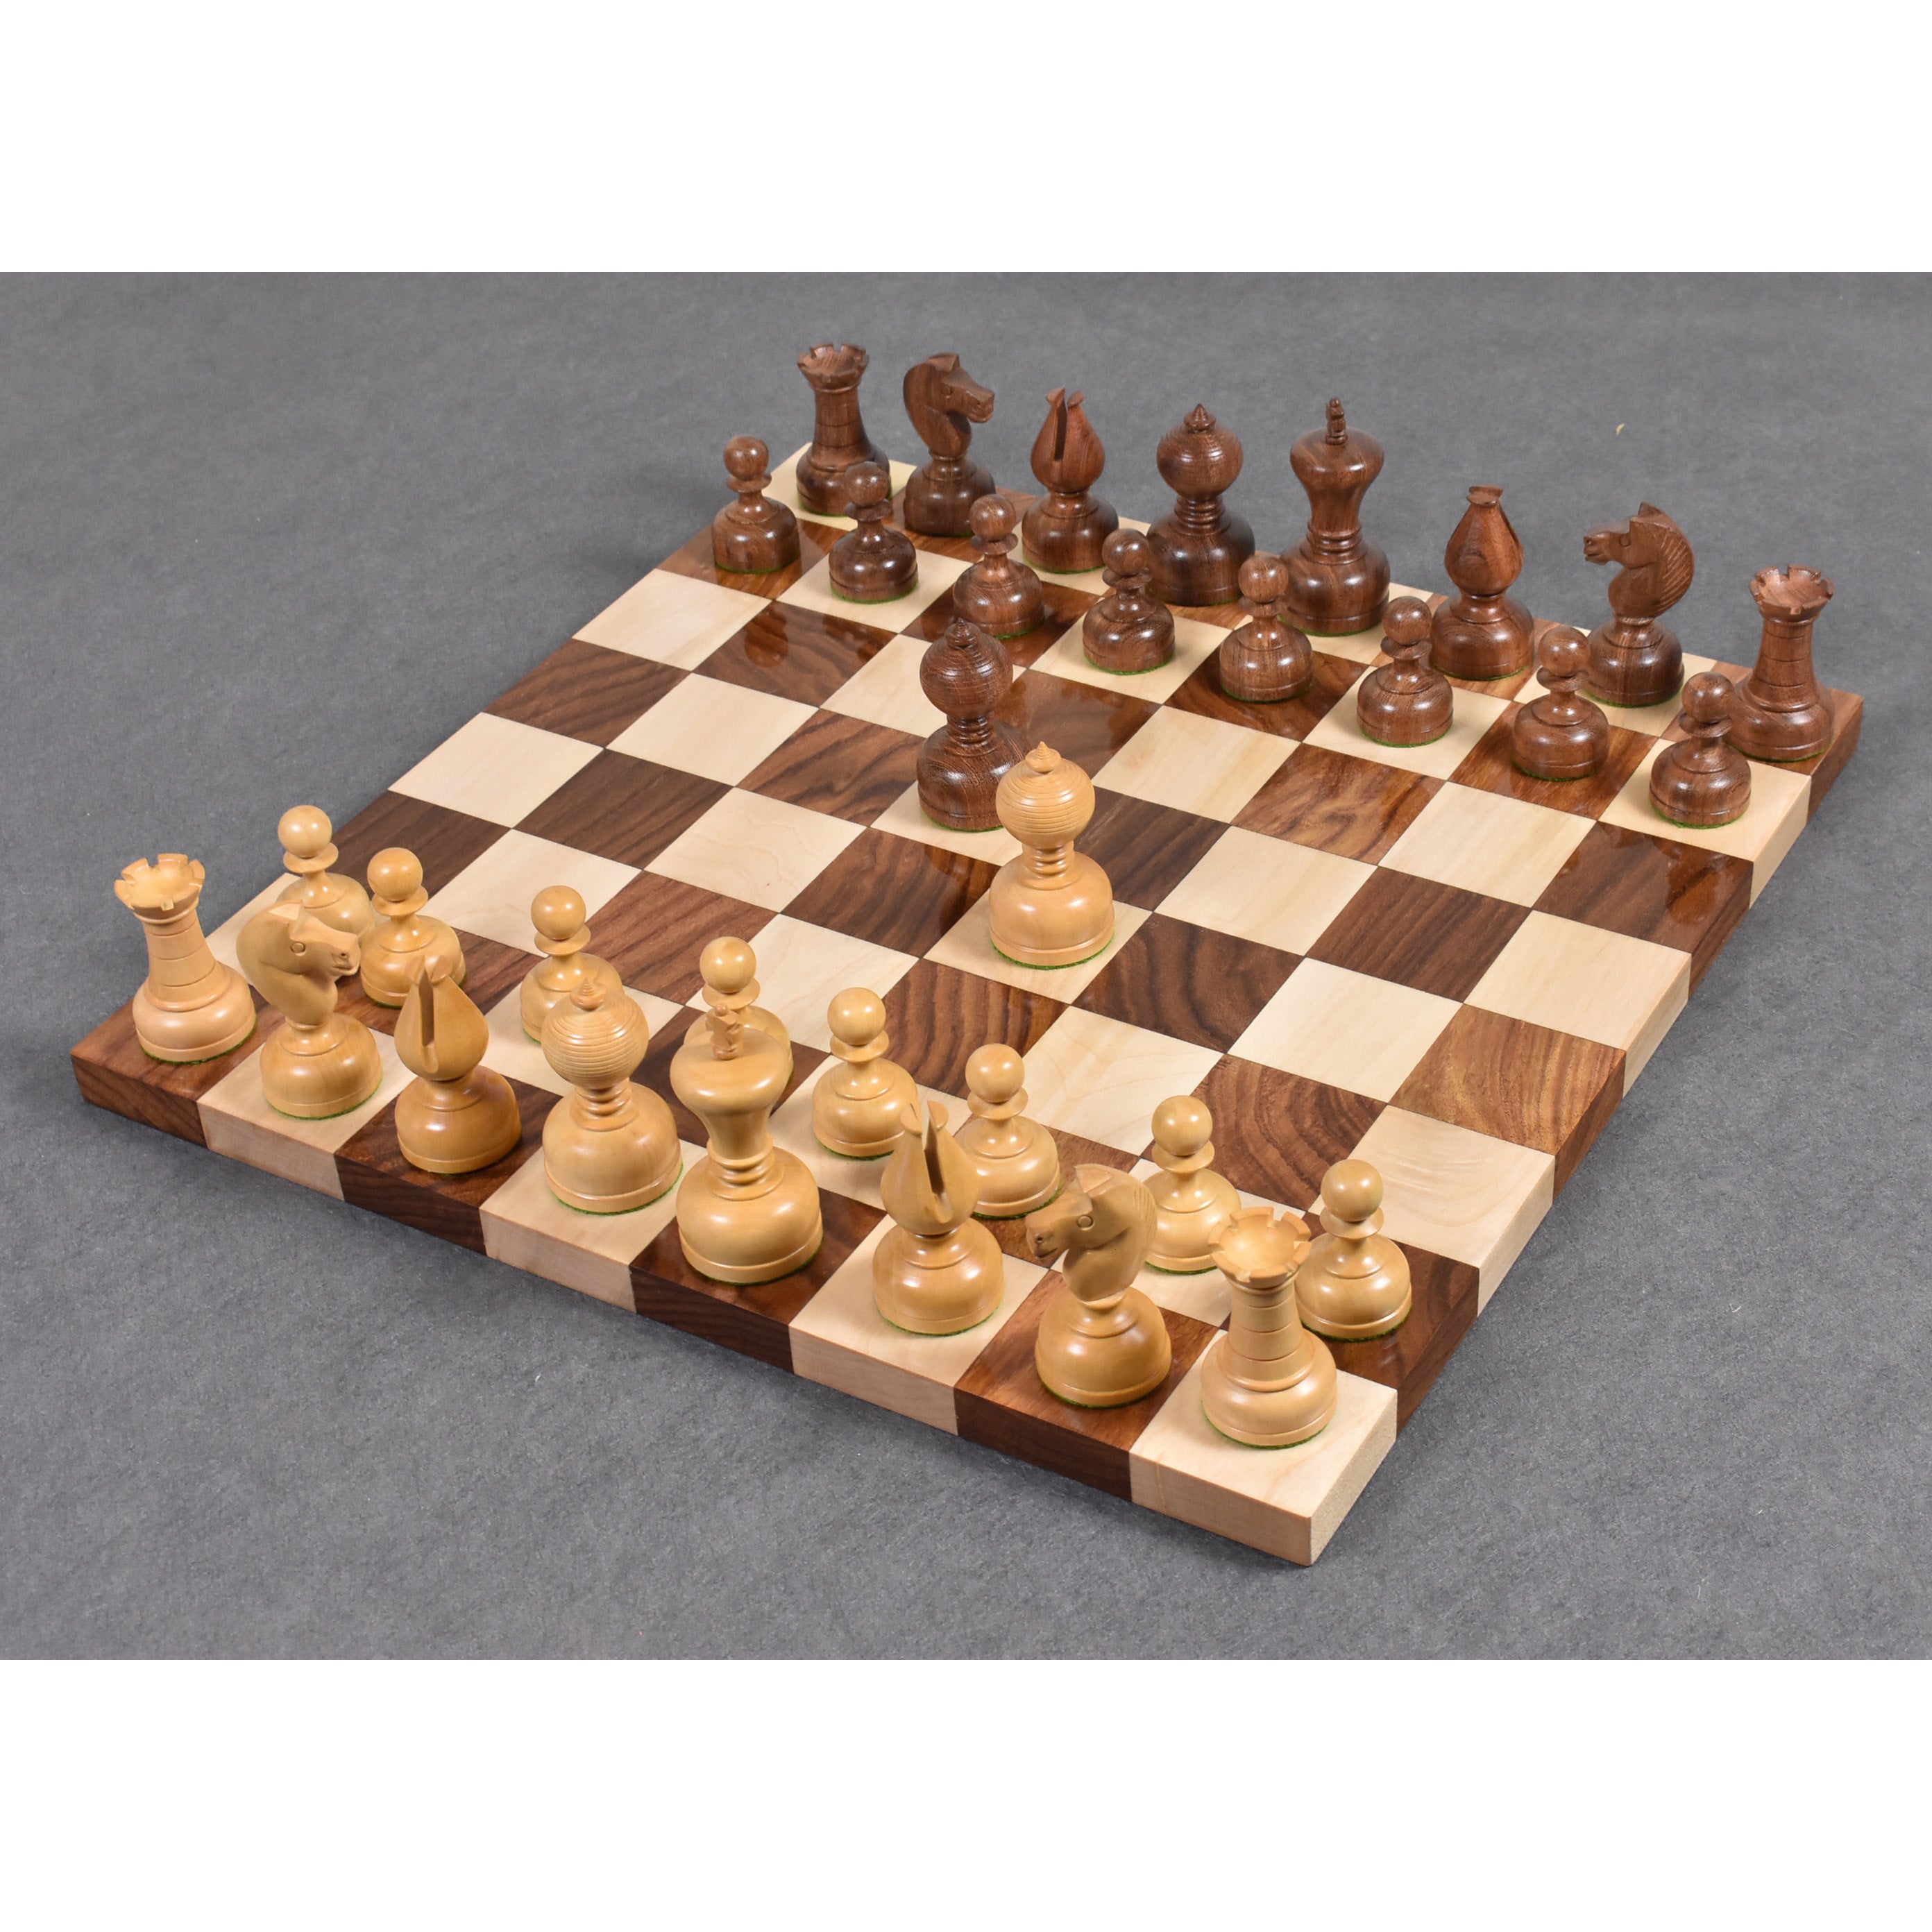 3.1" Library Series Staunton Chess Set- Chess Pieces Only - Weighted Boxwood & Acacia